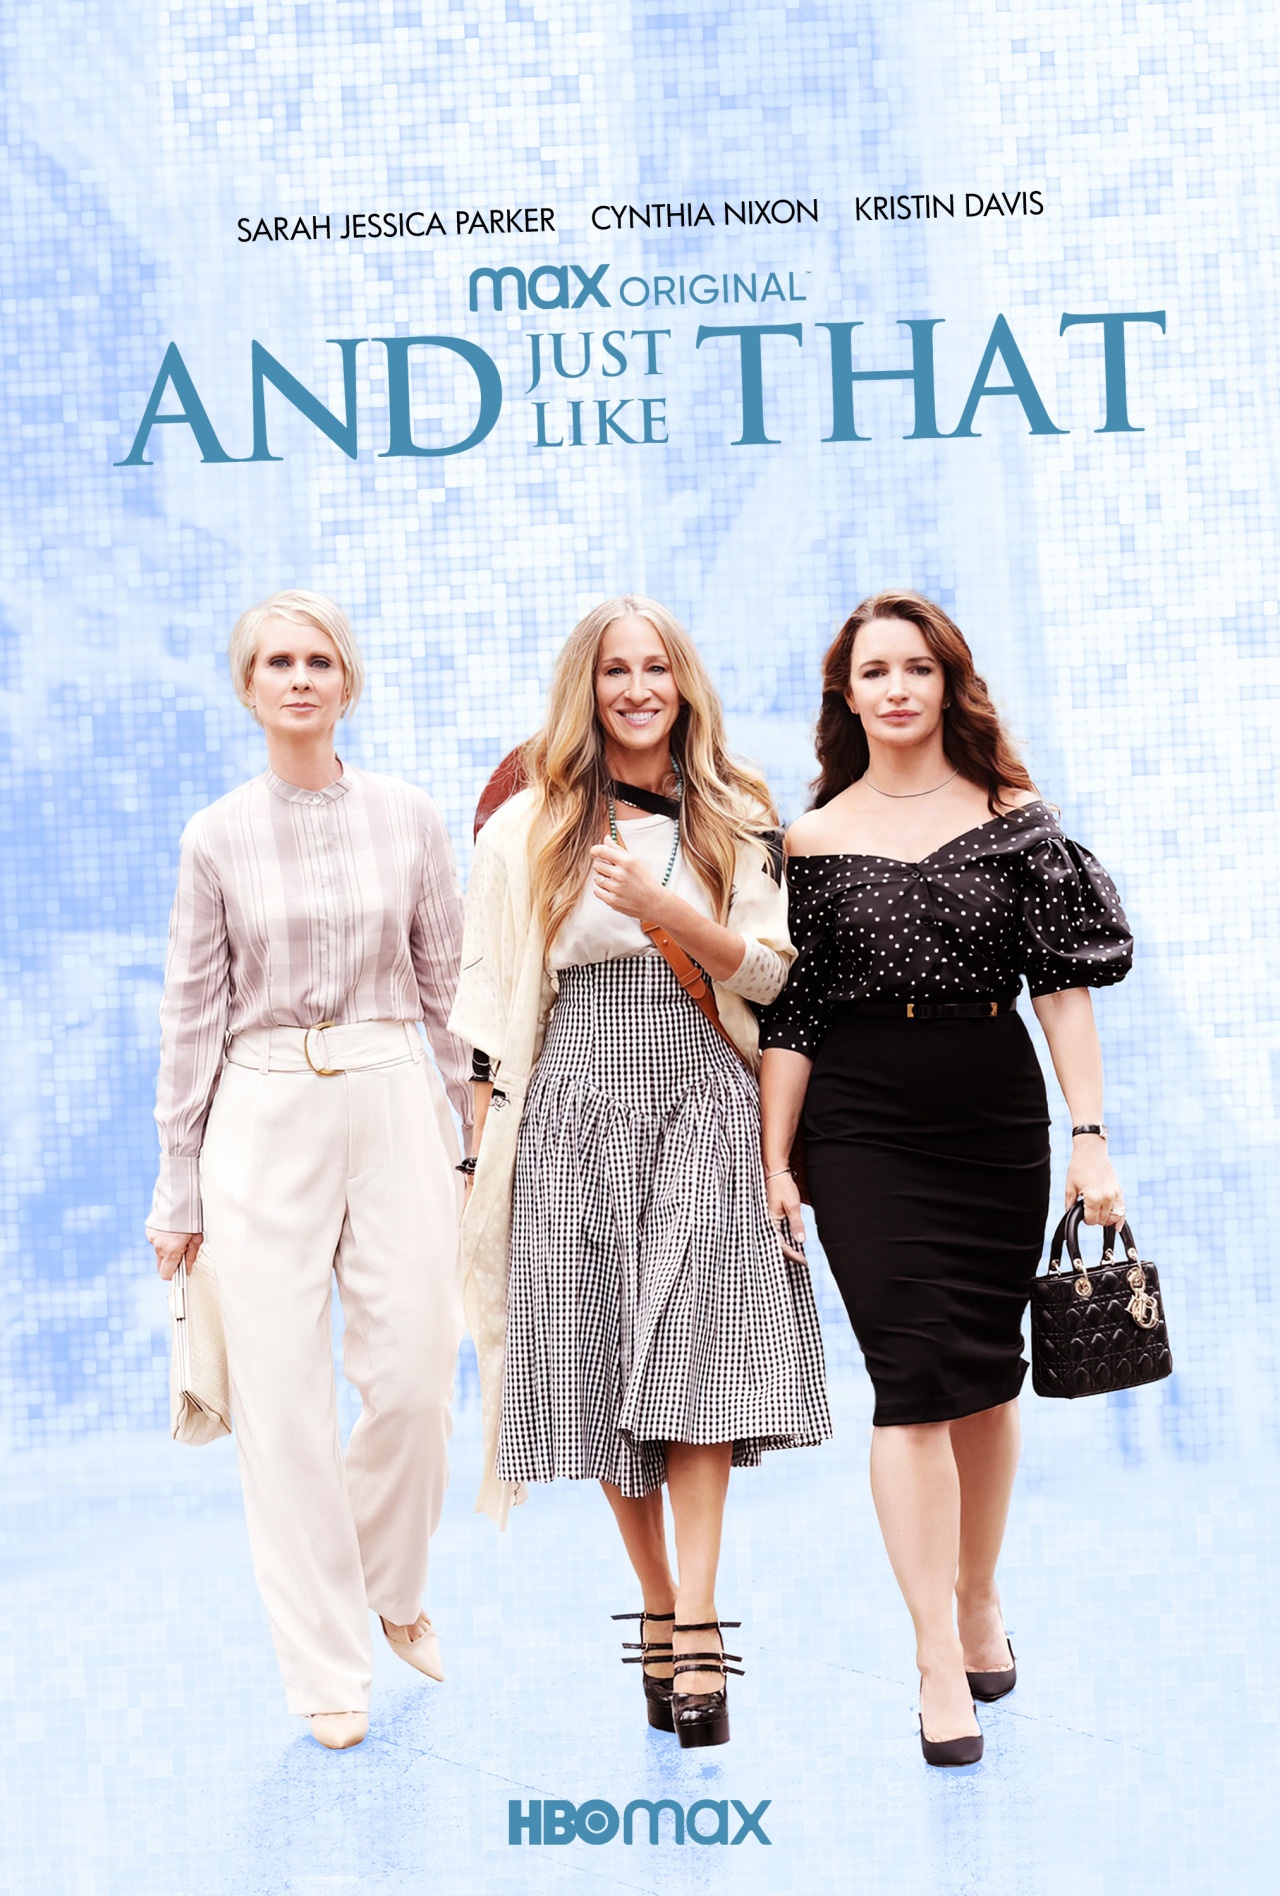 First Look: ‘And Just Like That’ (Sex & The City) Starring Sarah Jessica Parker